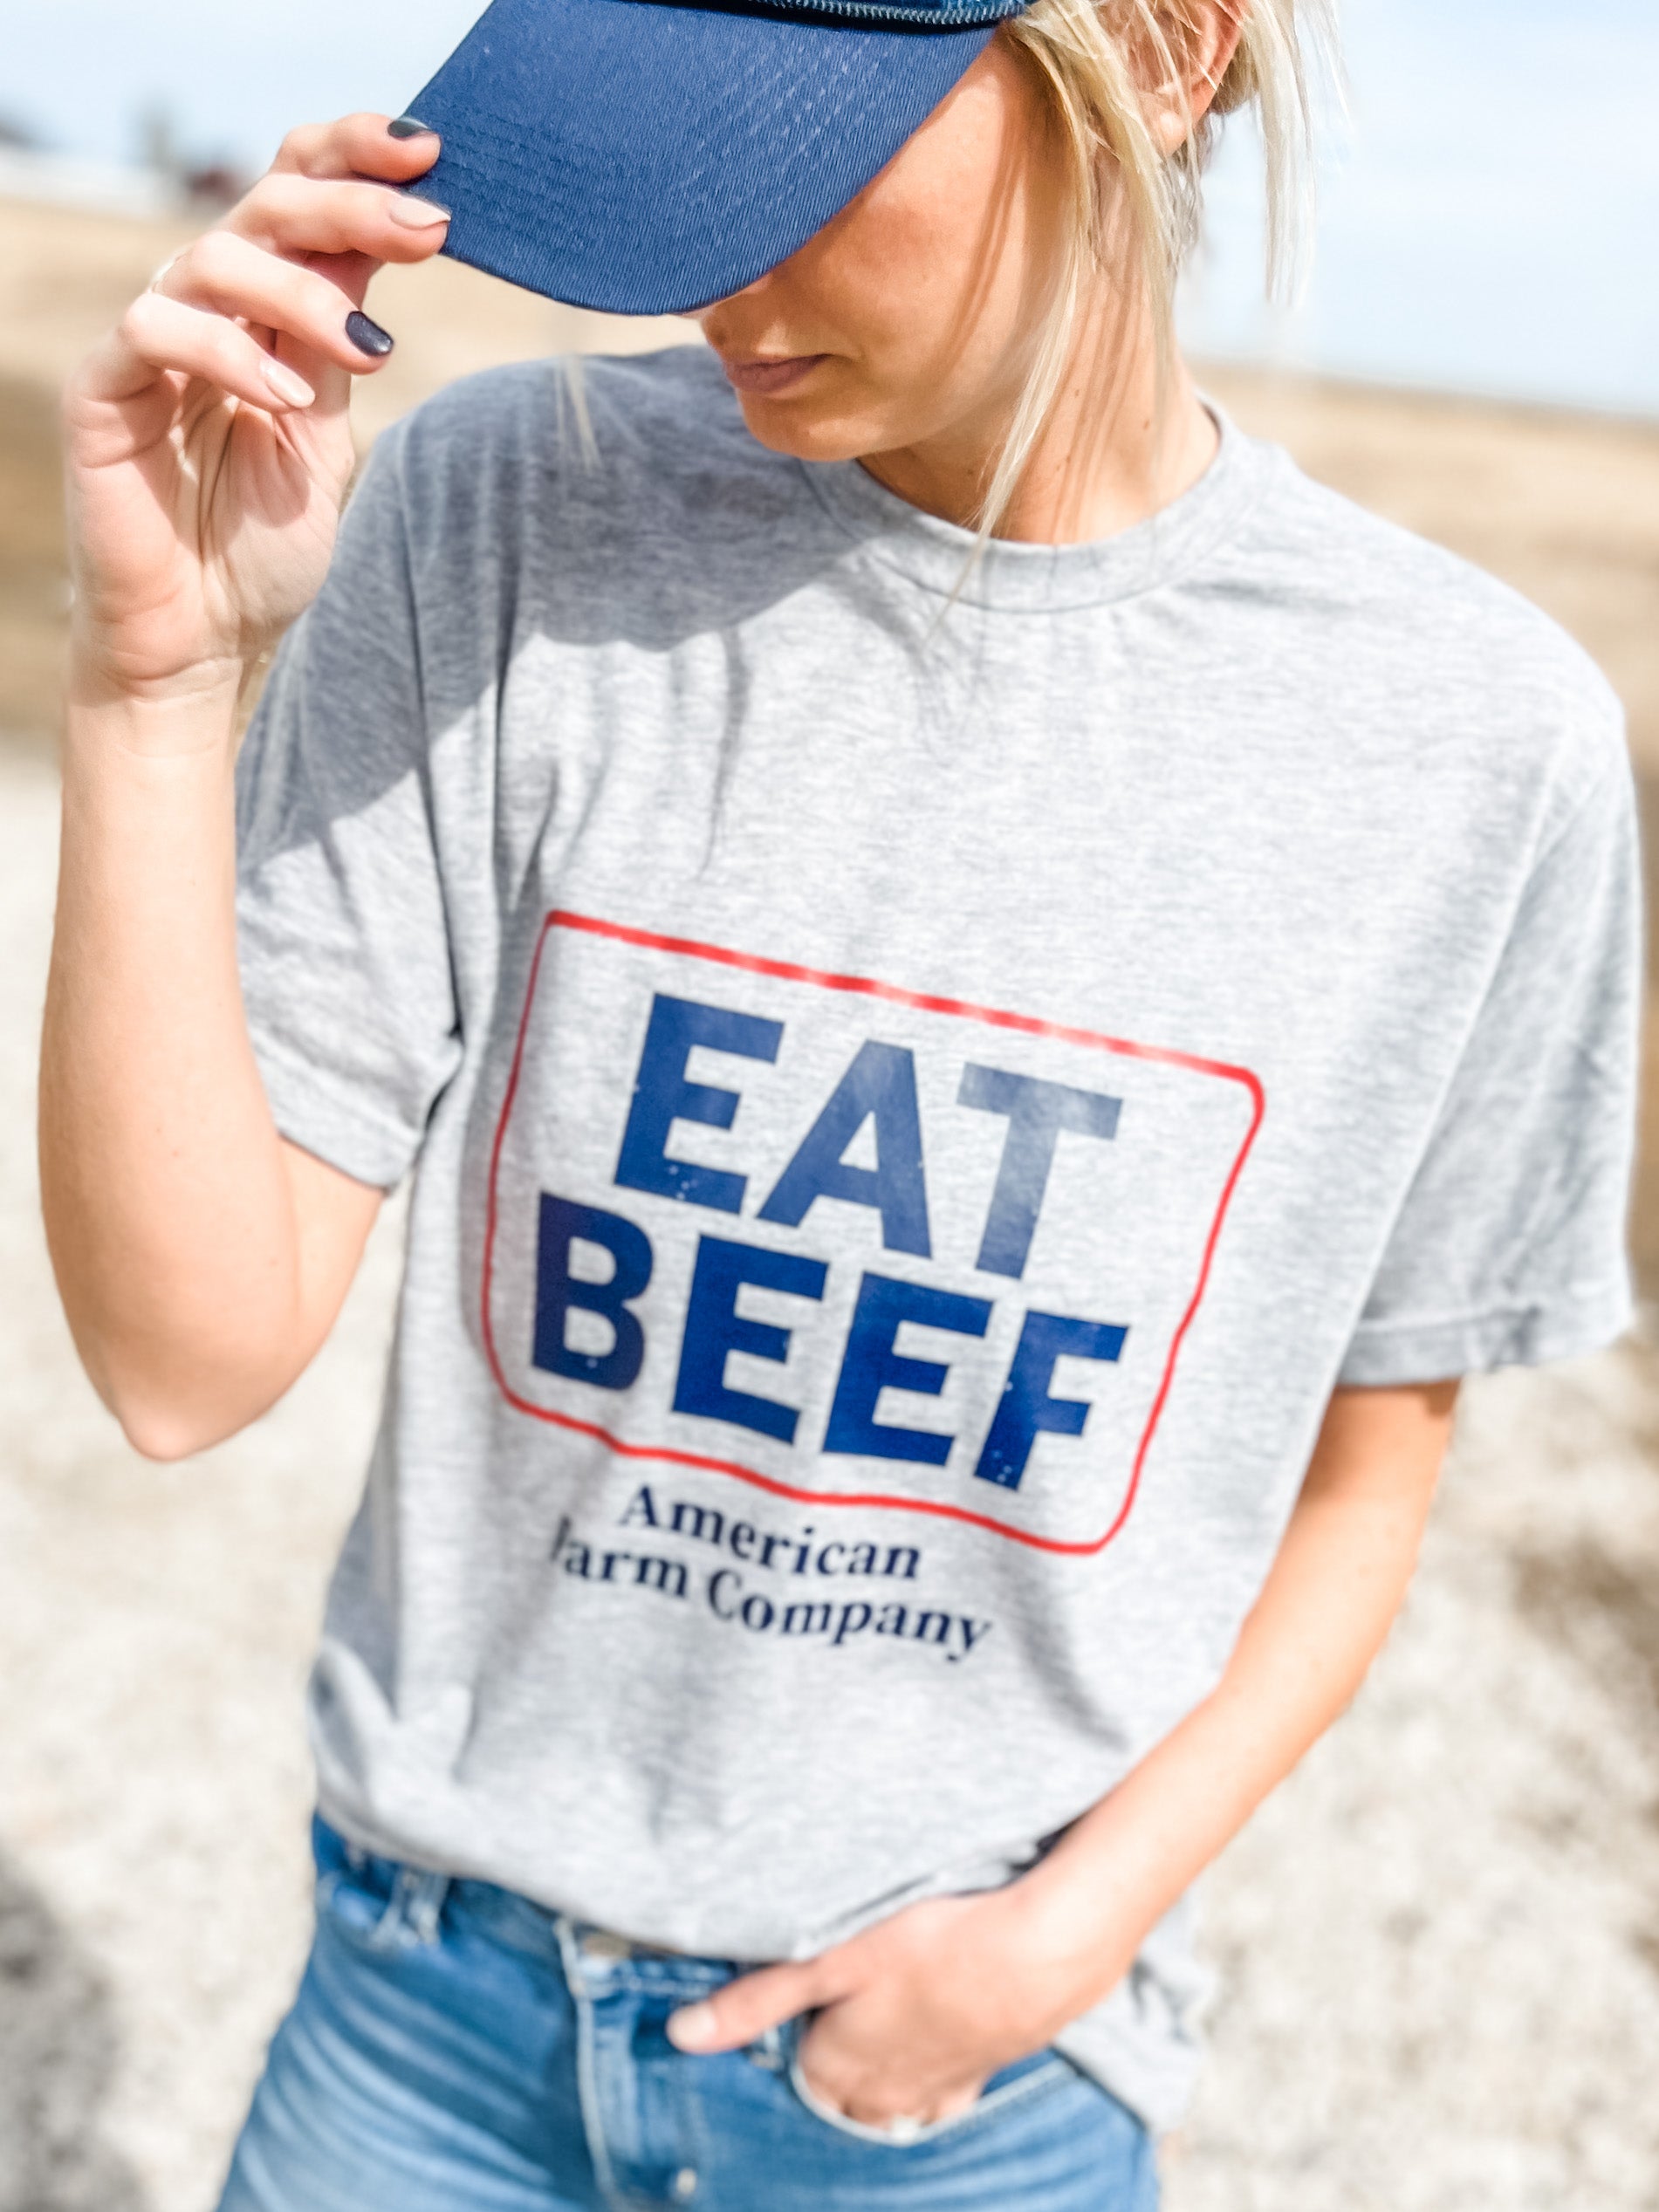 A woman in jeans and a cap donning an Eat Beef Shirt in the field